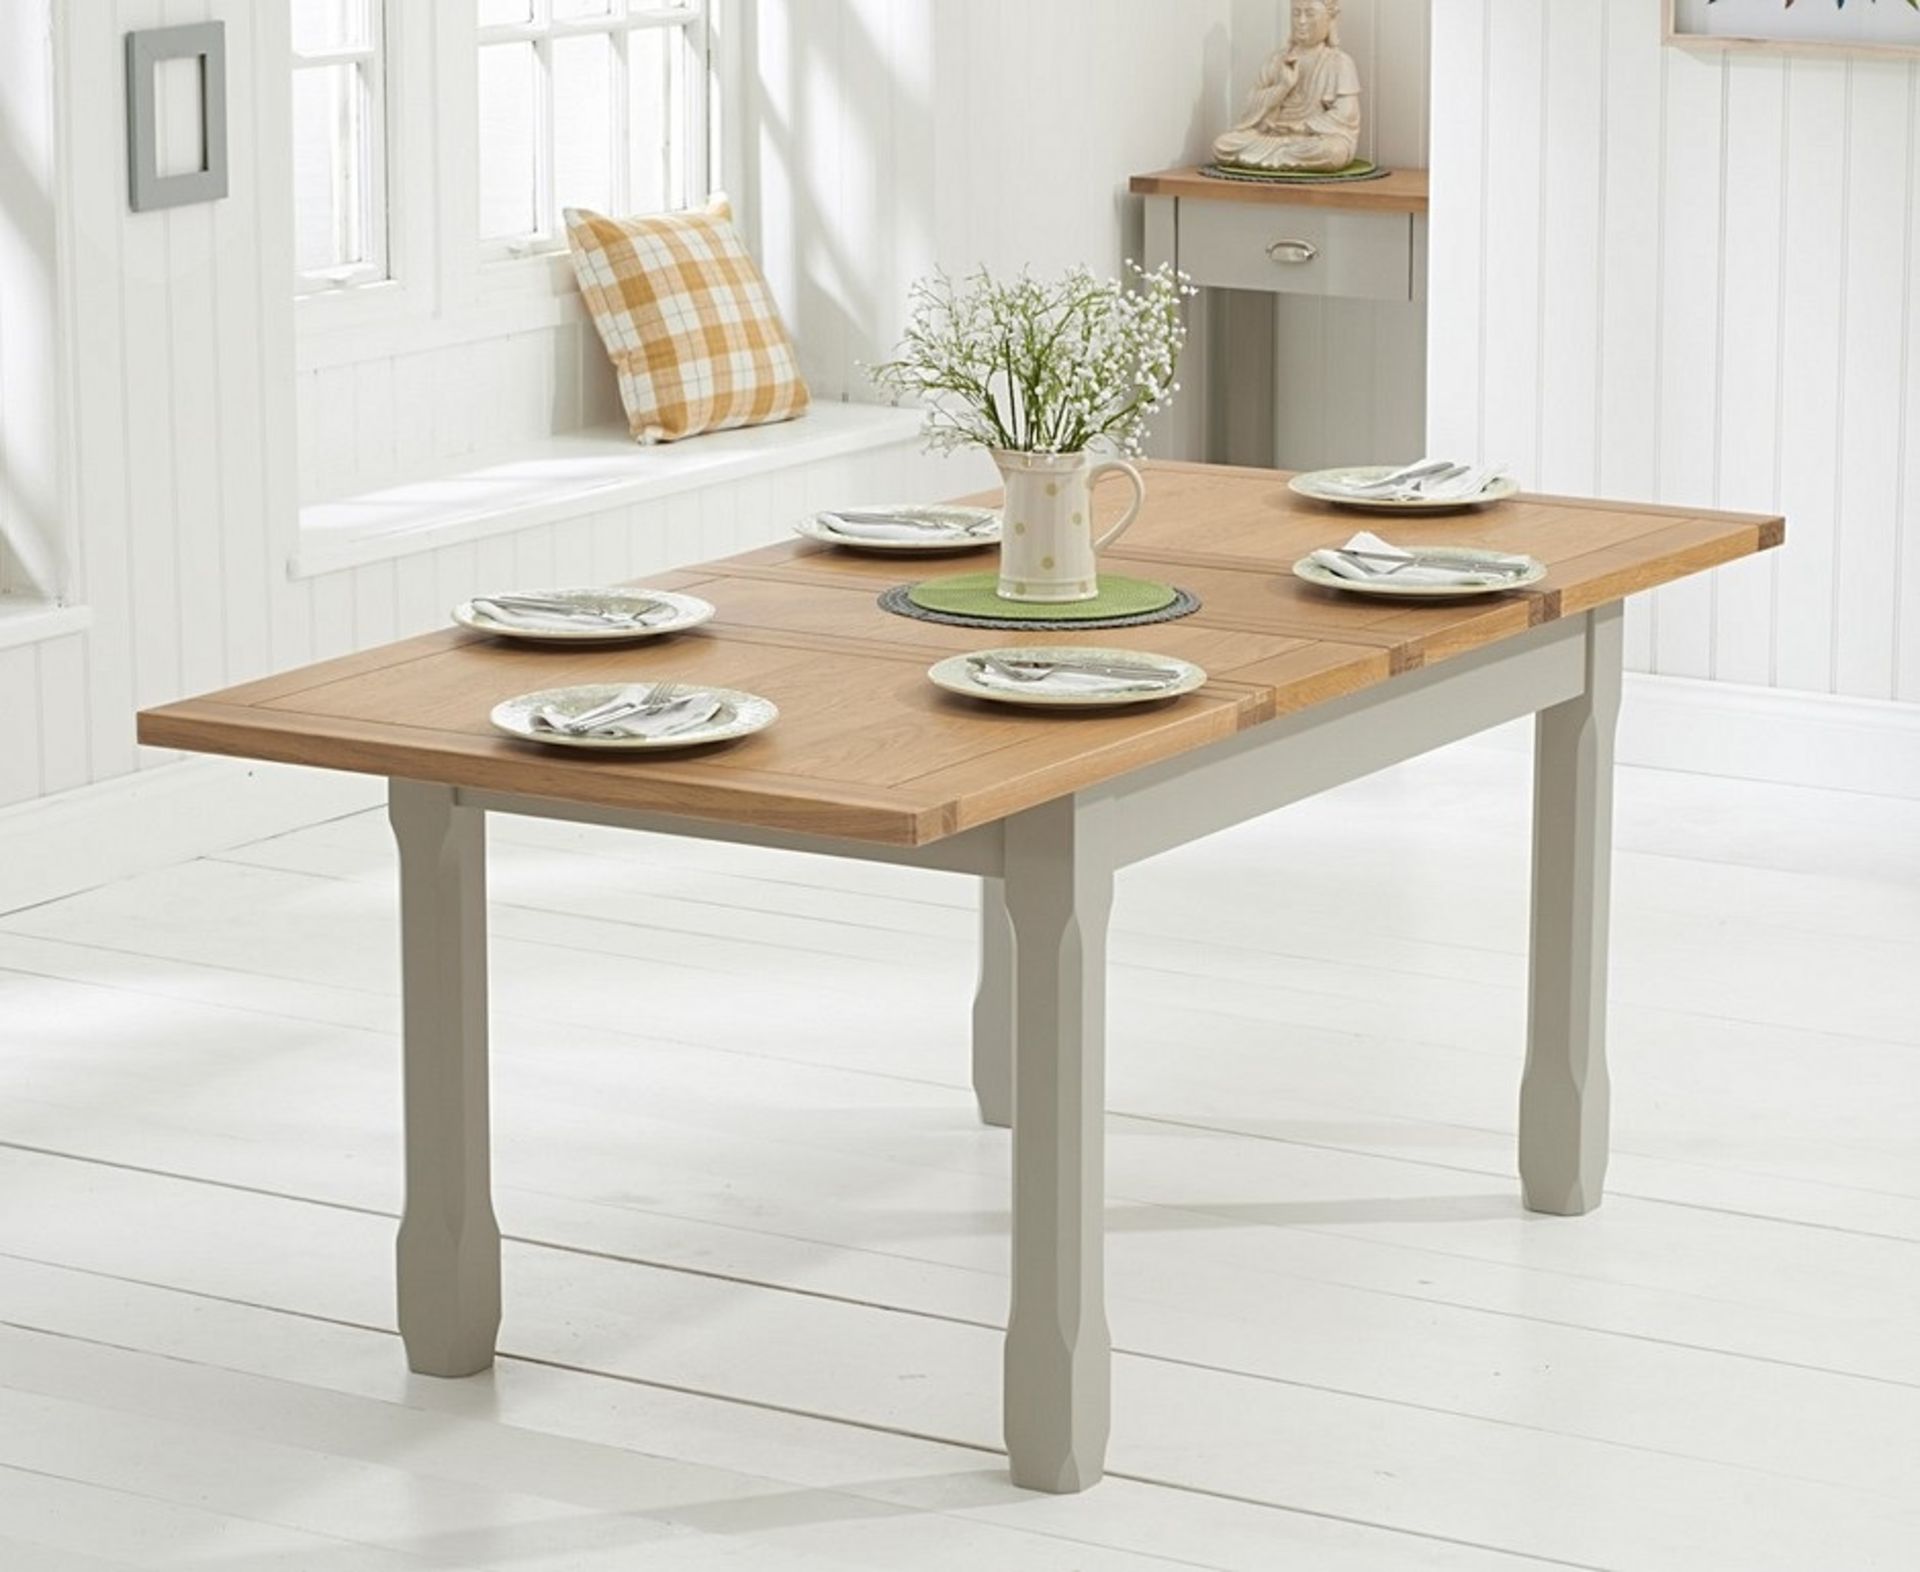 Somerset 130cm Oak and Grey Extending Dining Table Classic, timeless design meets practicality and